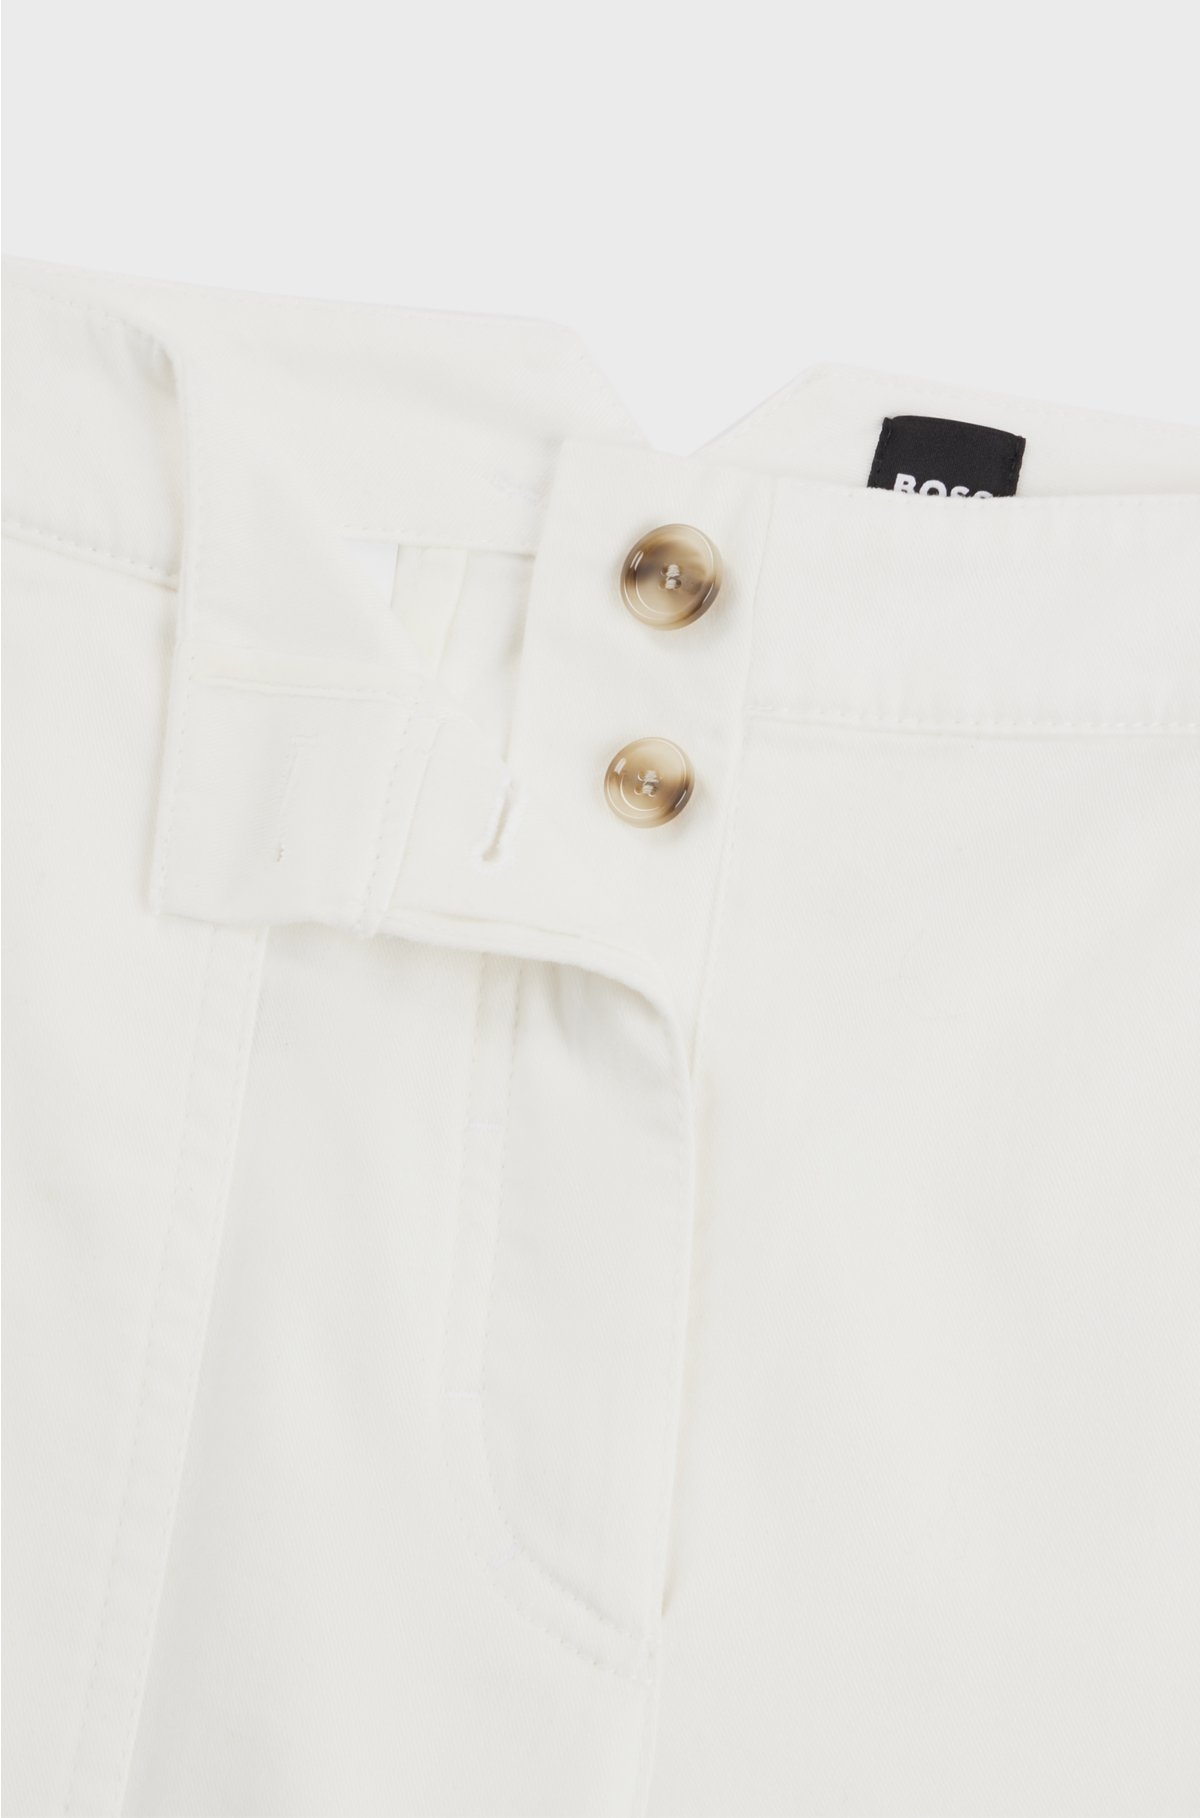 Regular-fit trousers in cotton-blend twill, White